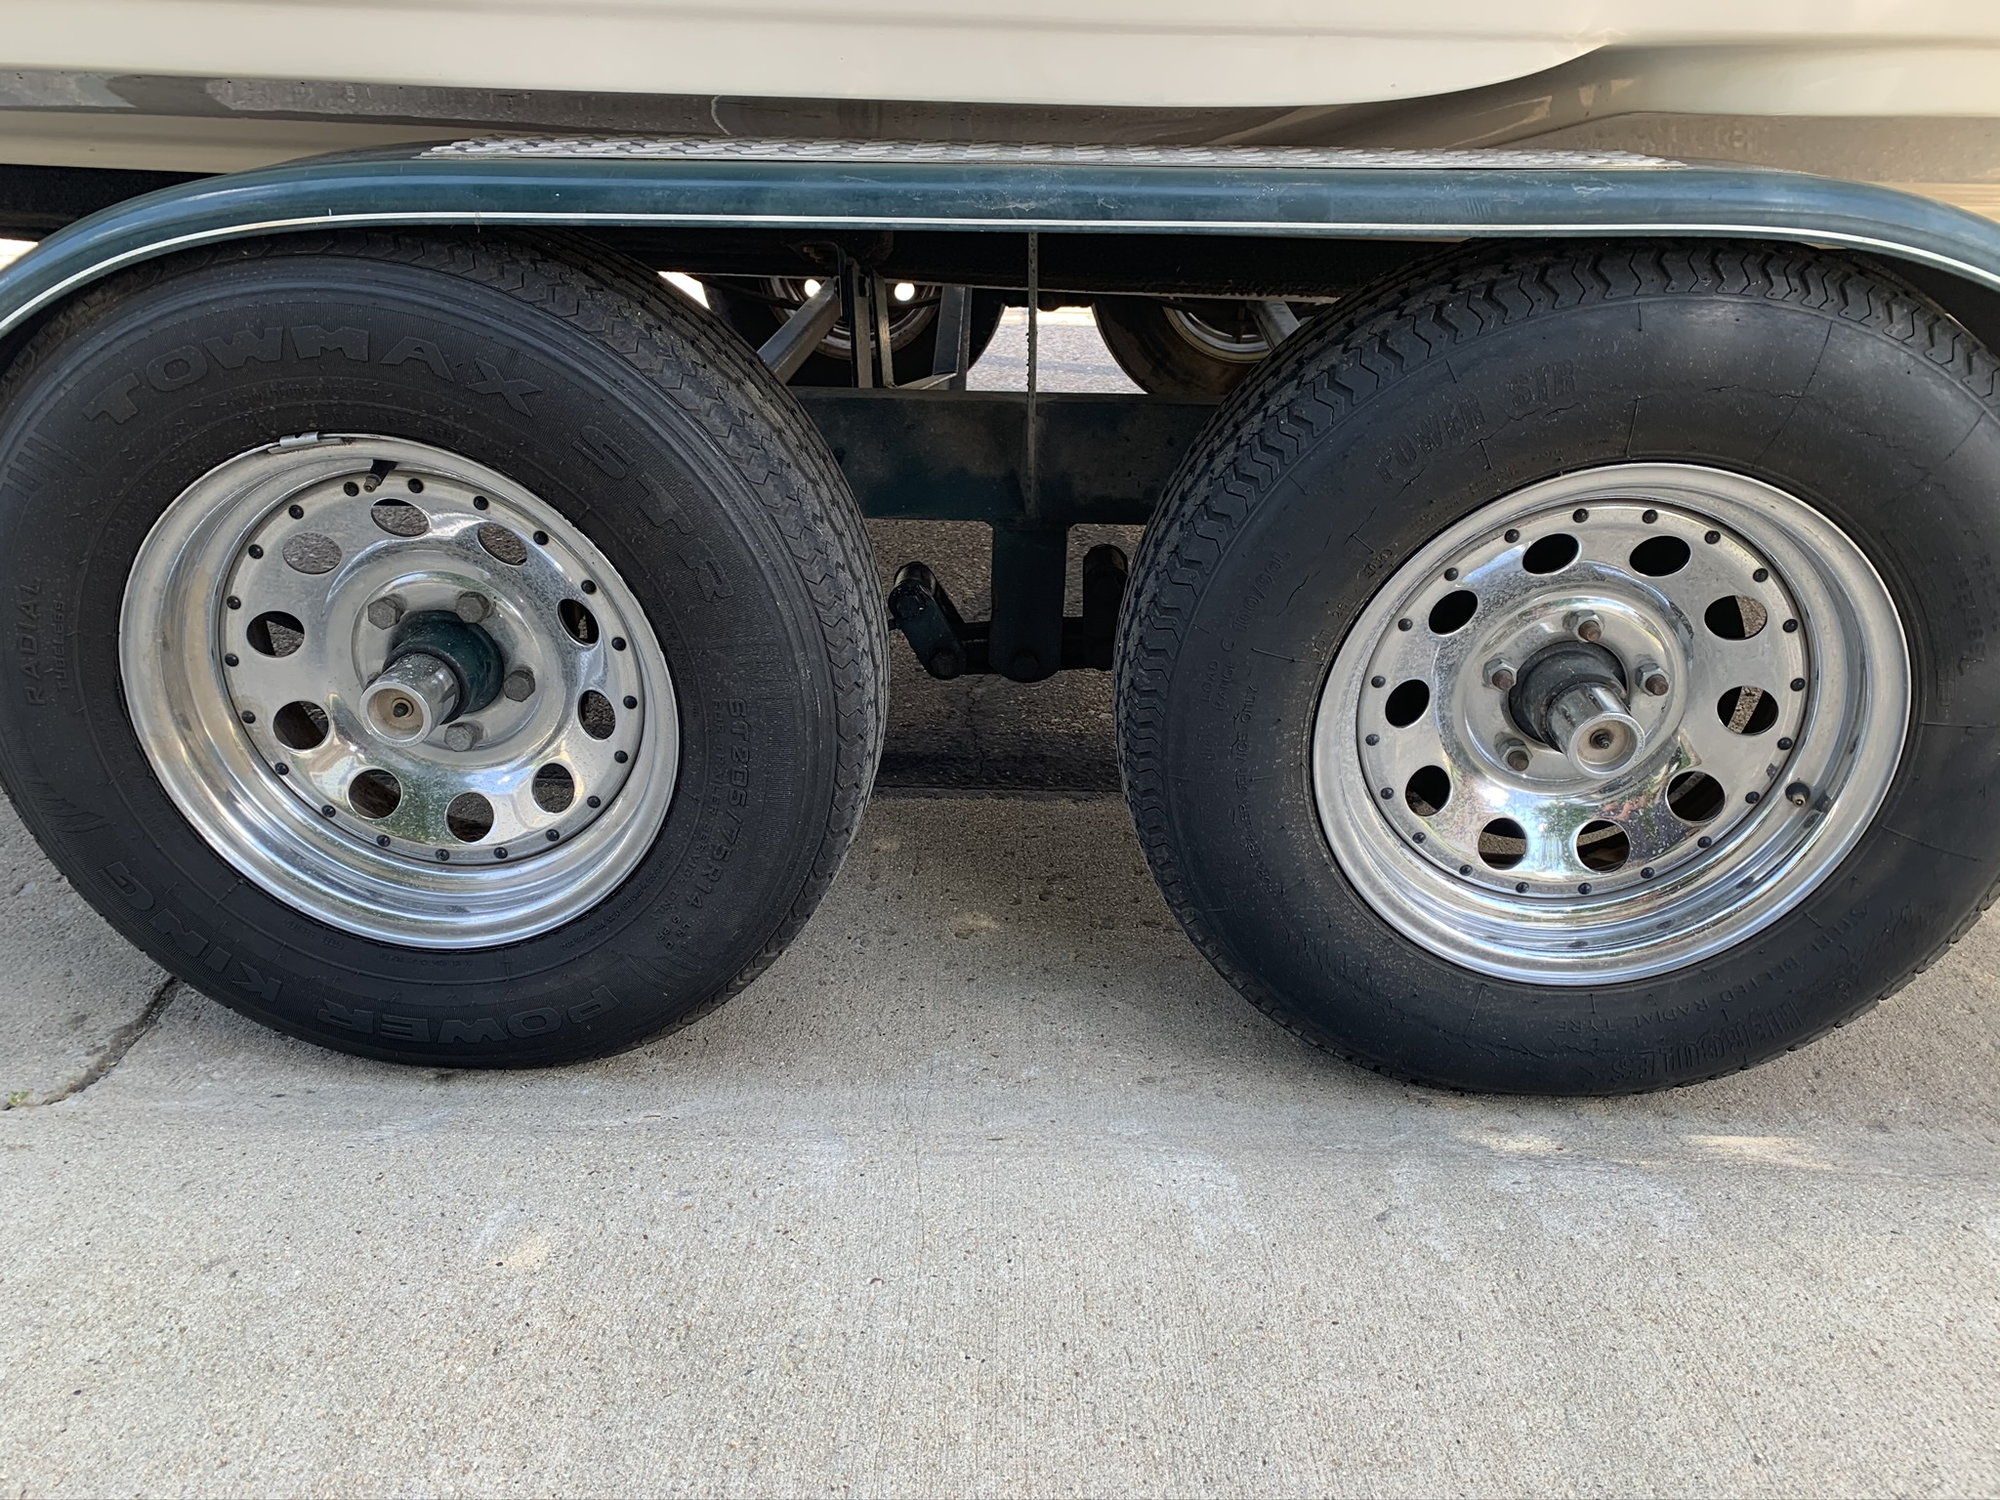 Help gaining 2-3 clearance on trailer tires to fender - The Hull Truth -  Boating and Fishing Forum